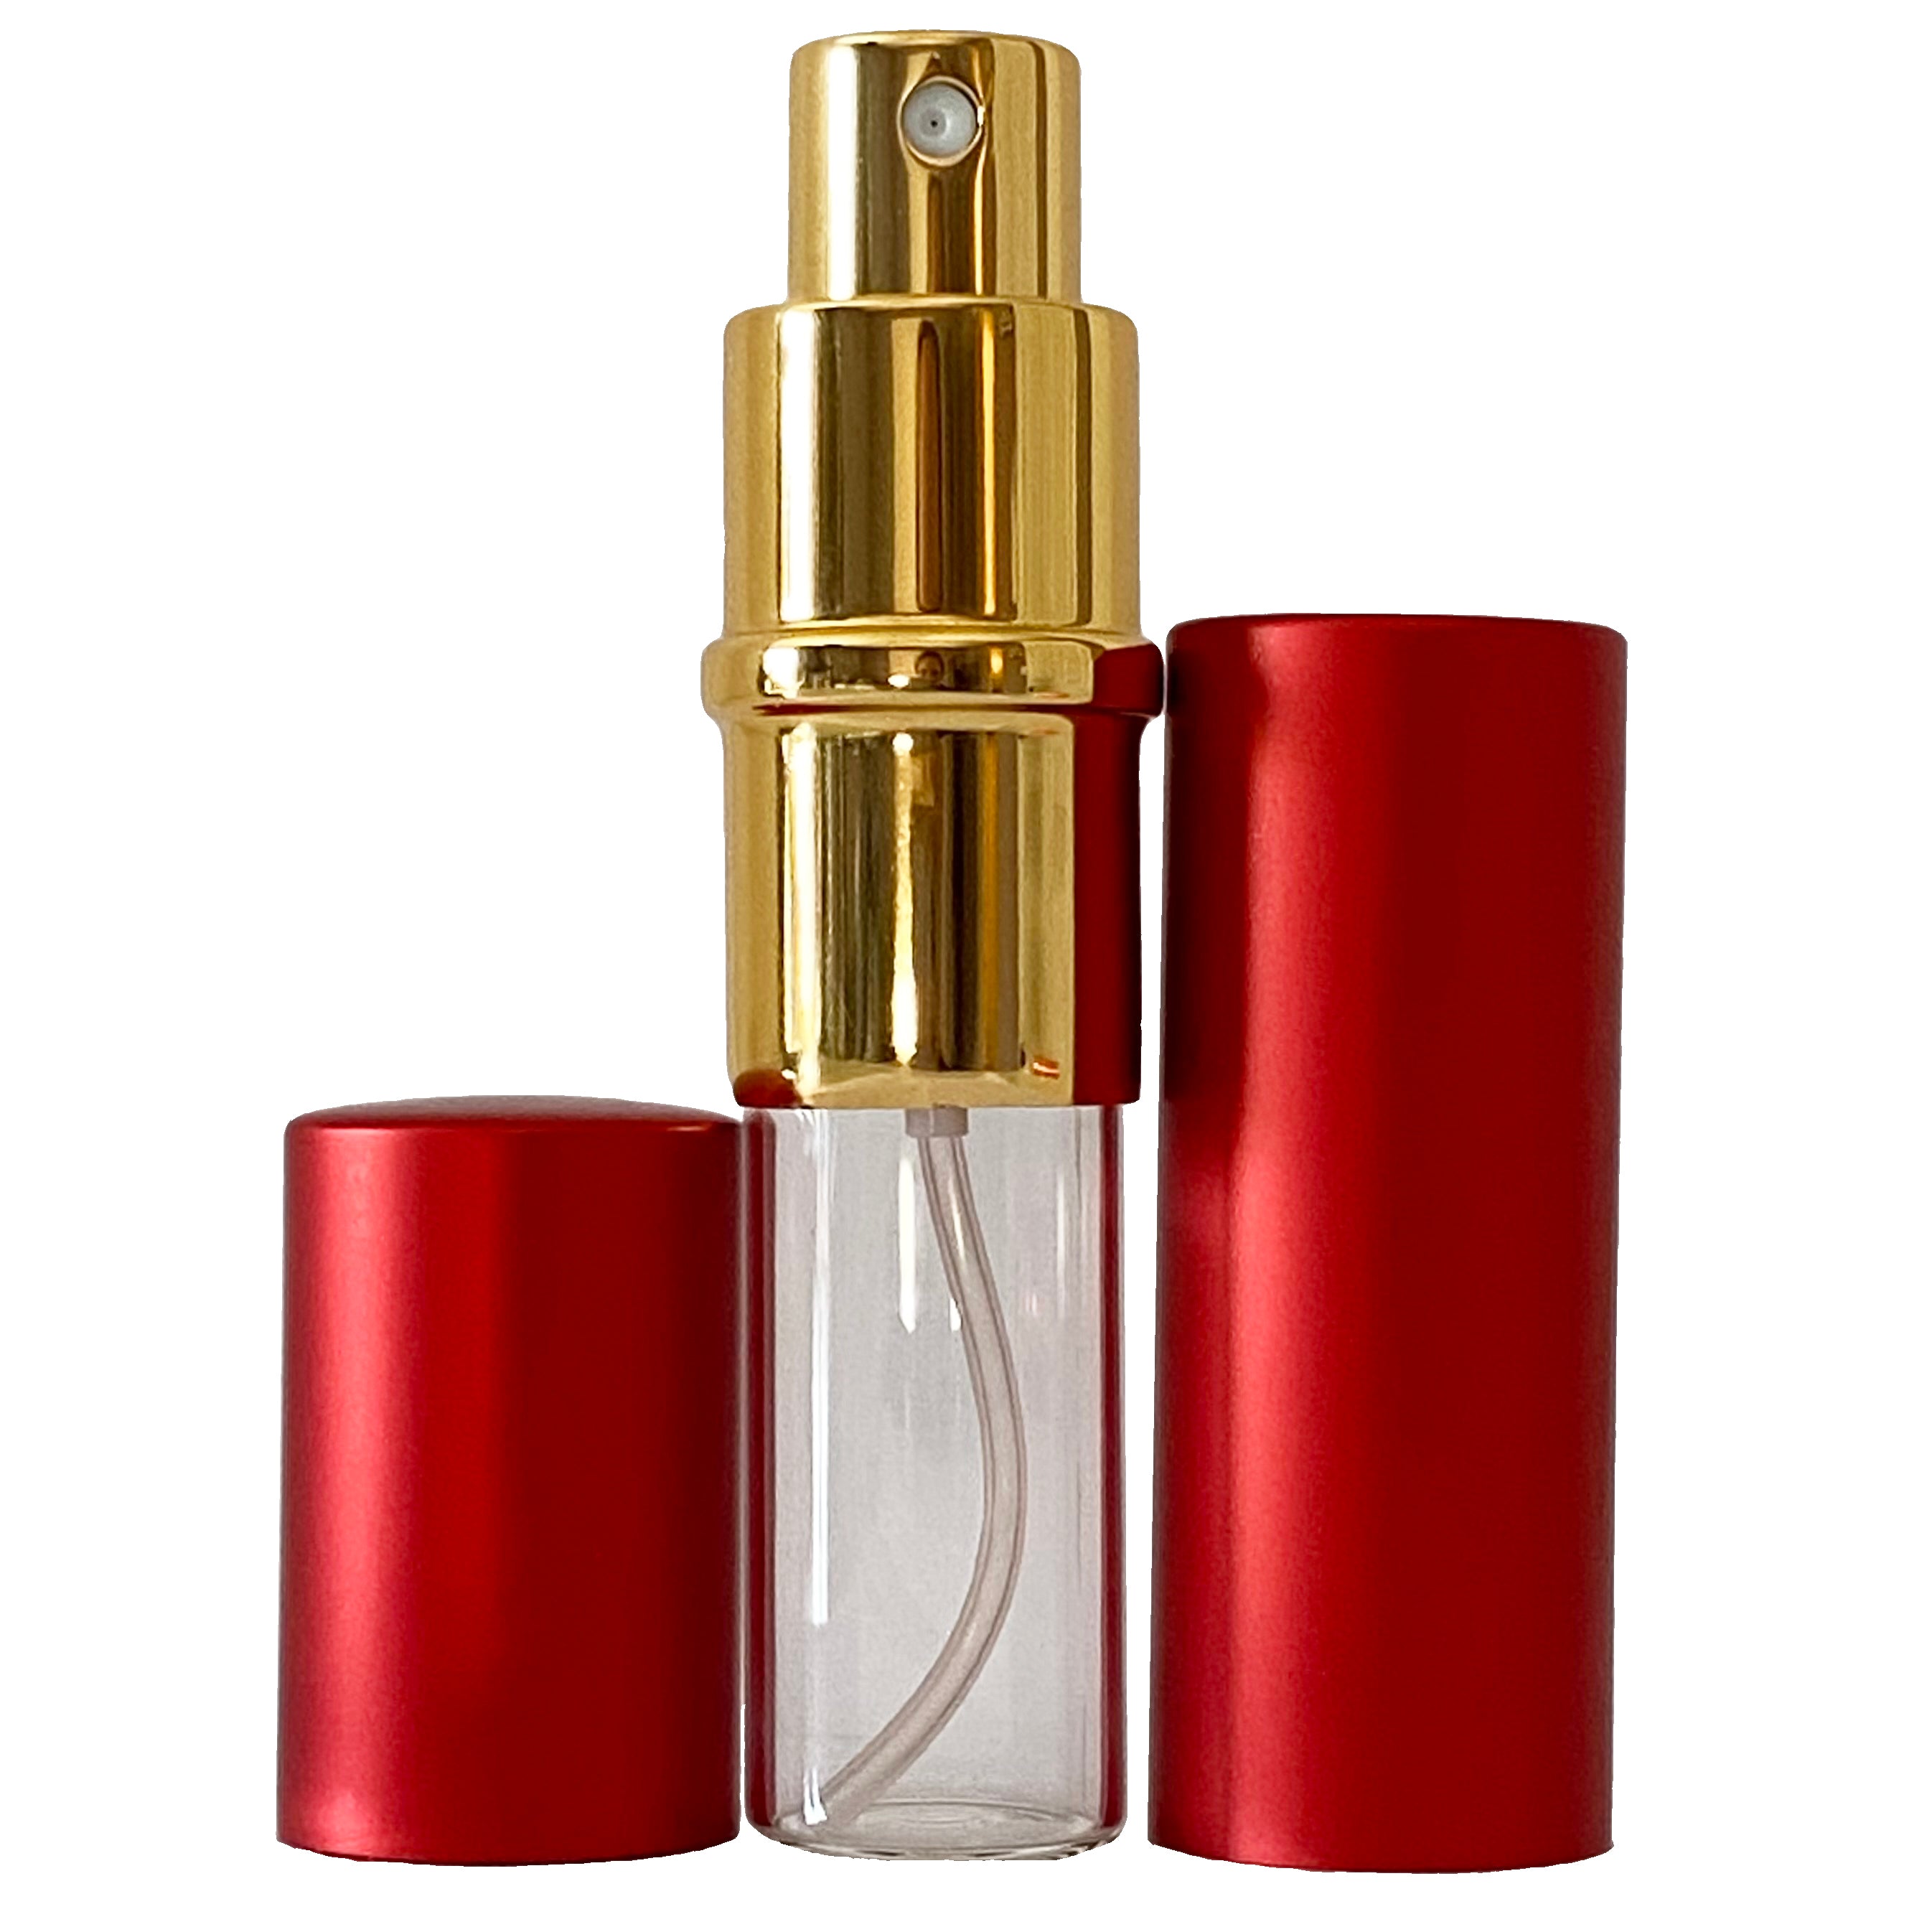 10ml 0.33oz Red Perfume Glass Spray Deluxe Bottles Gold Atomizers